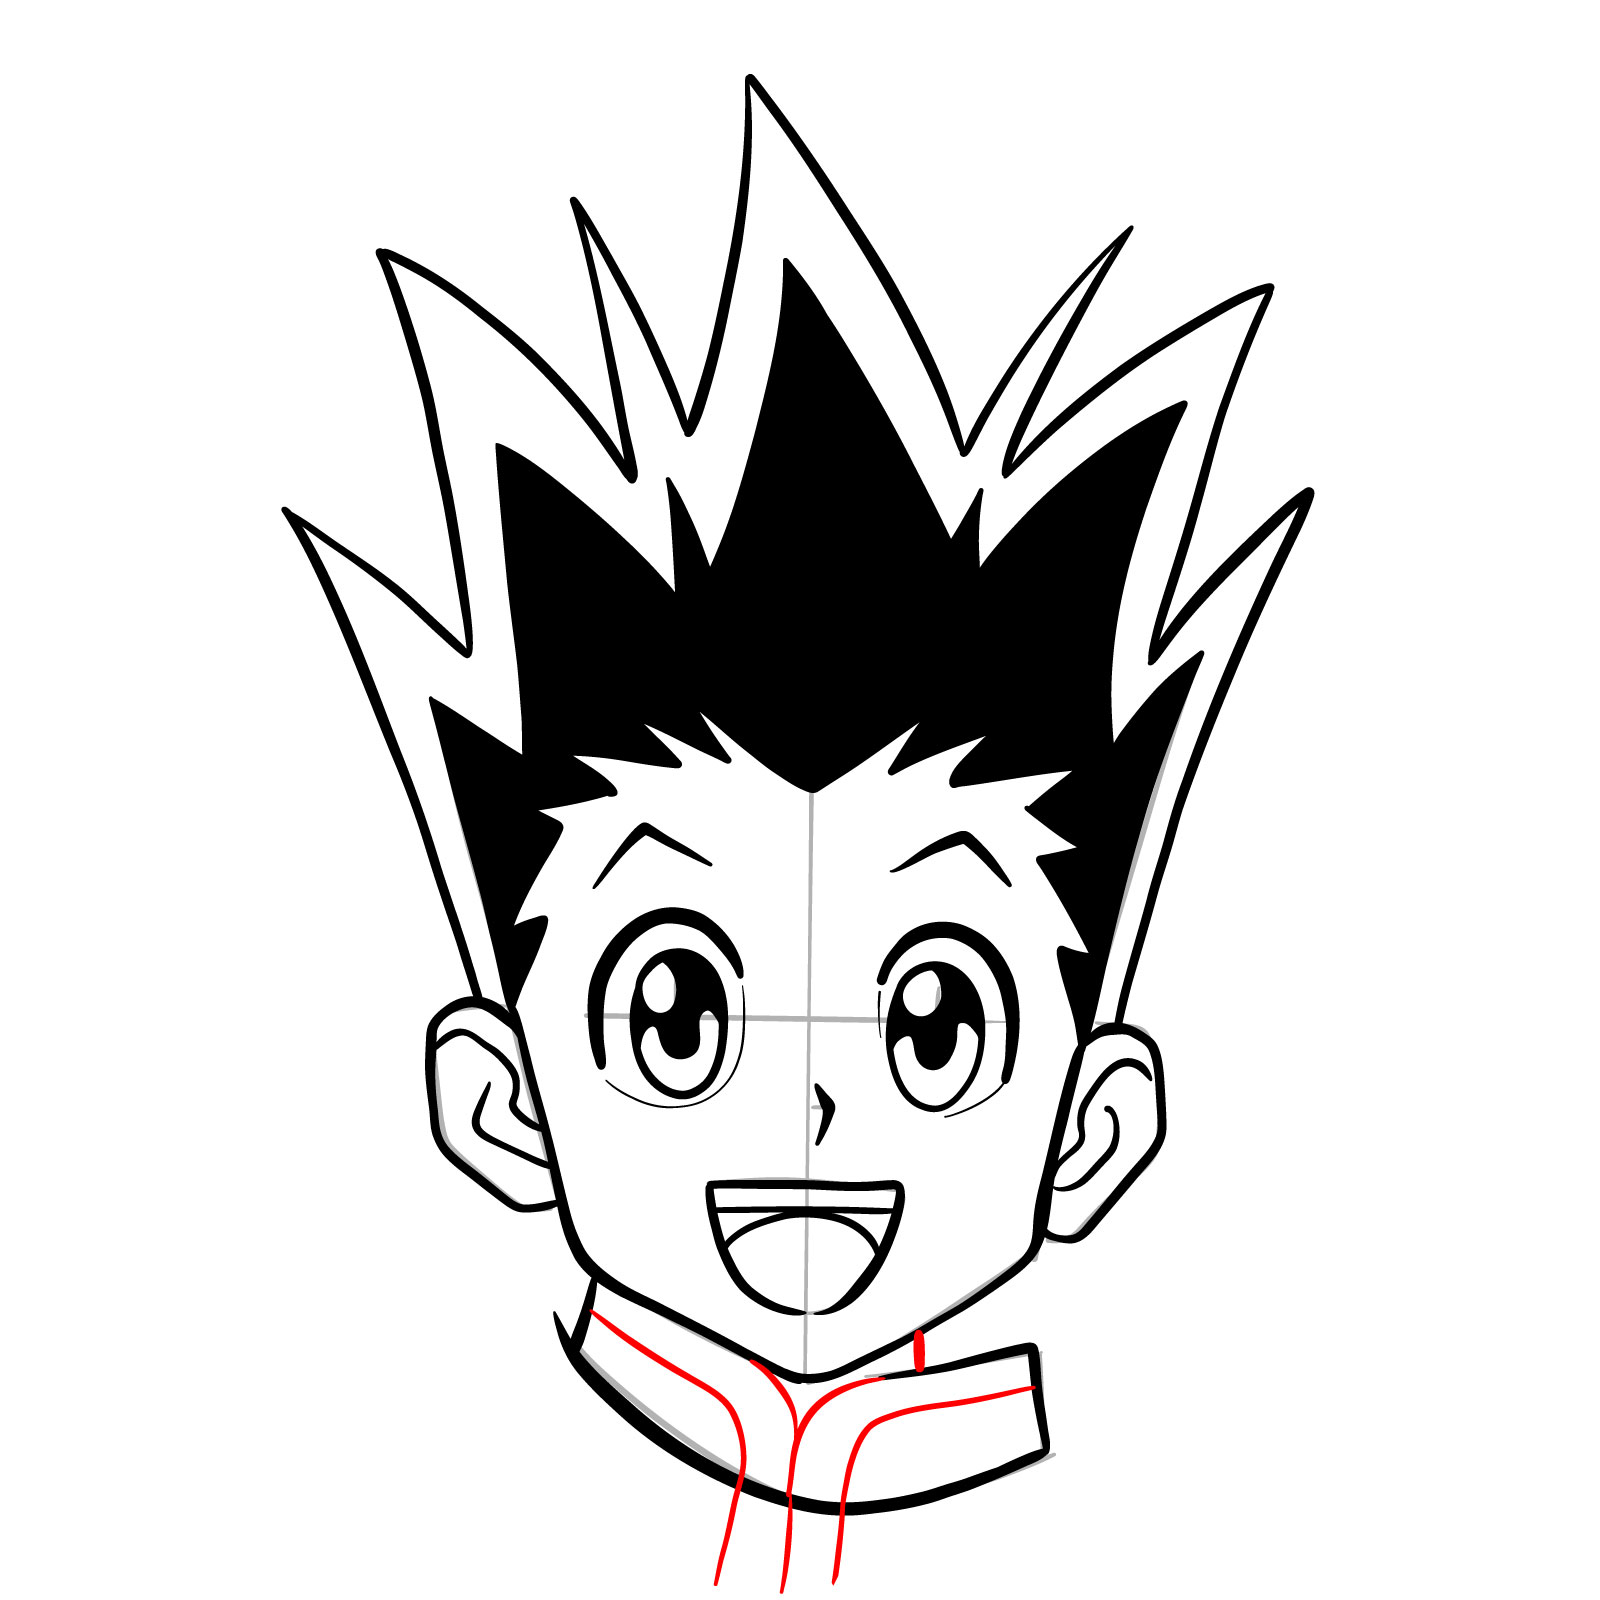 How to draw the face of Gon Freecss - step 16